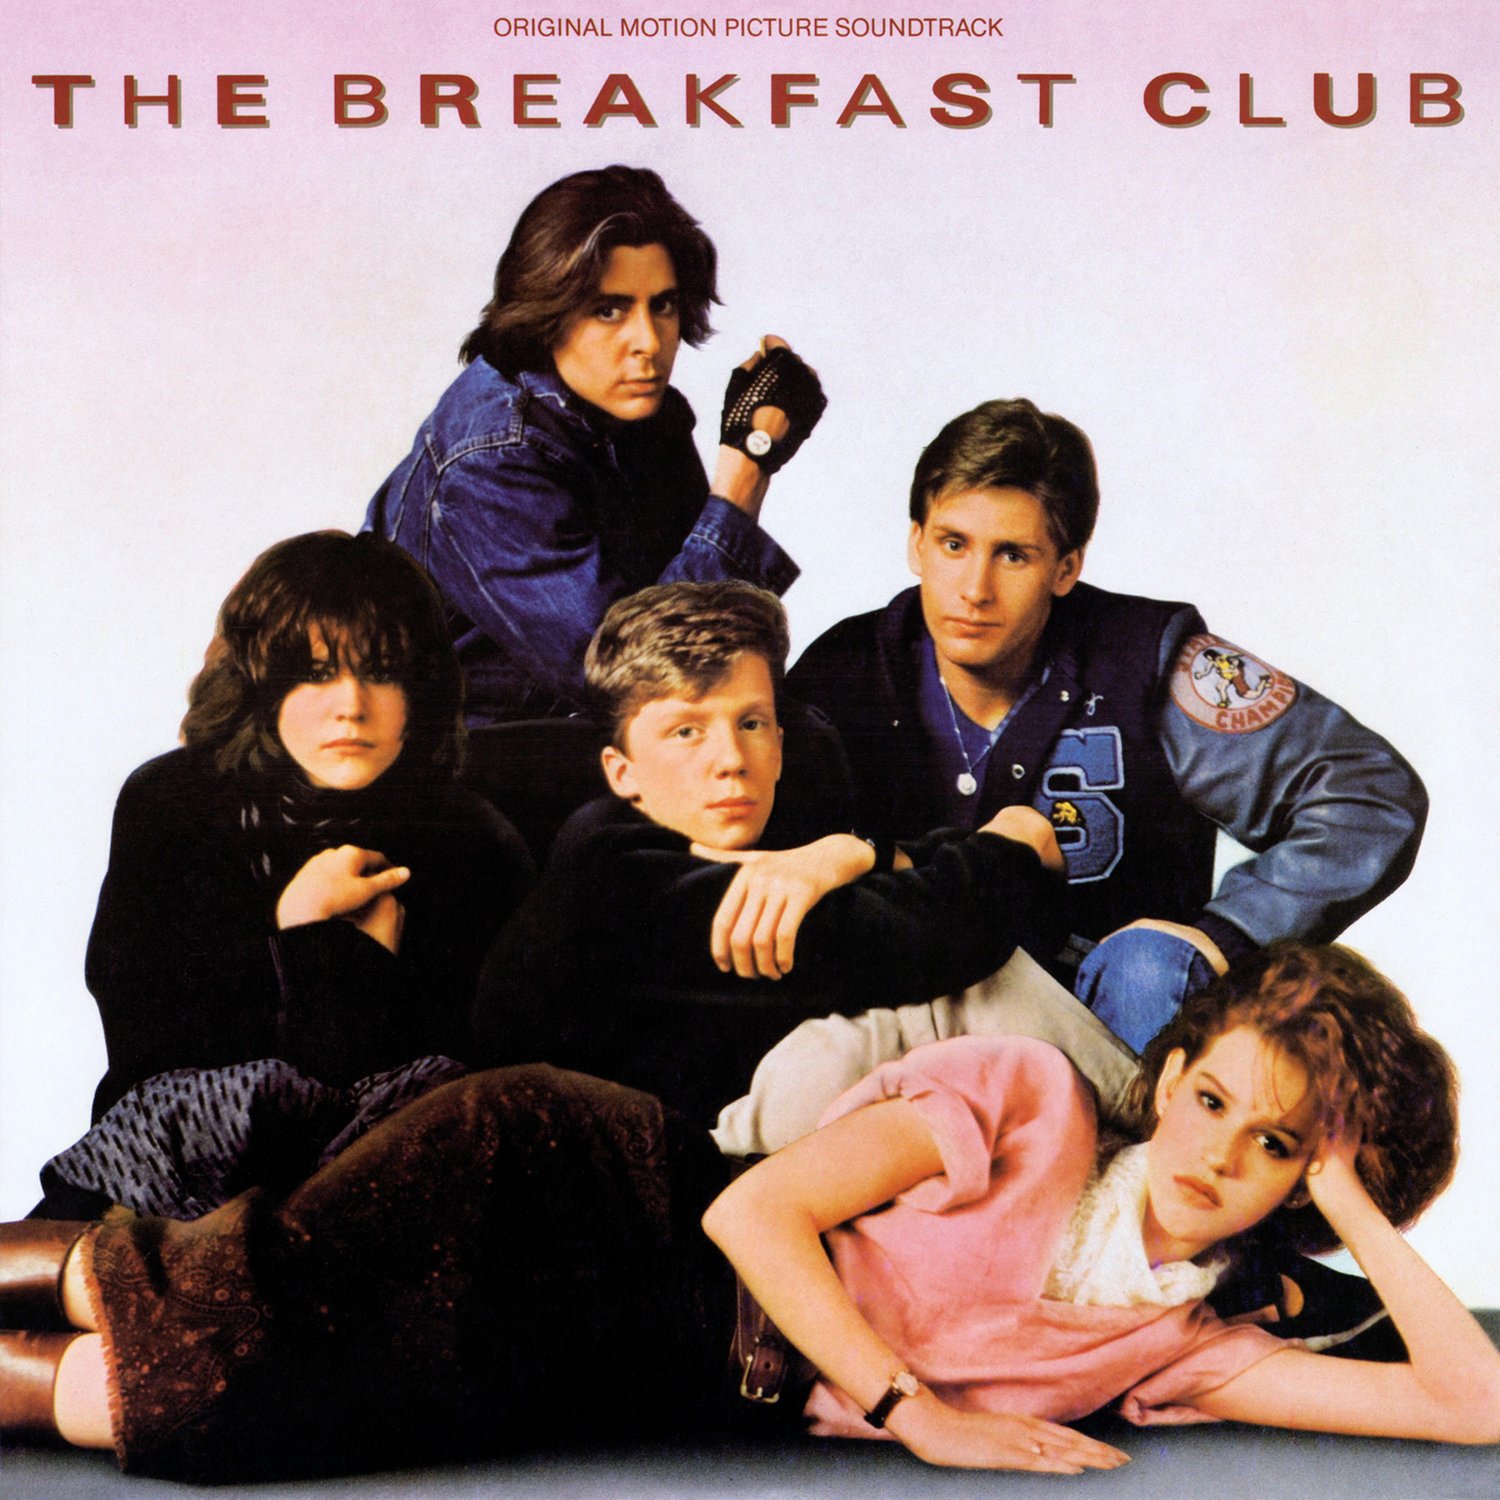 THE BREAKFAST CLUB Soundtrack BANNER Huge 4X4 Ft Fabric Poster Tapestry Flag Print  art